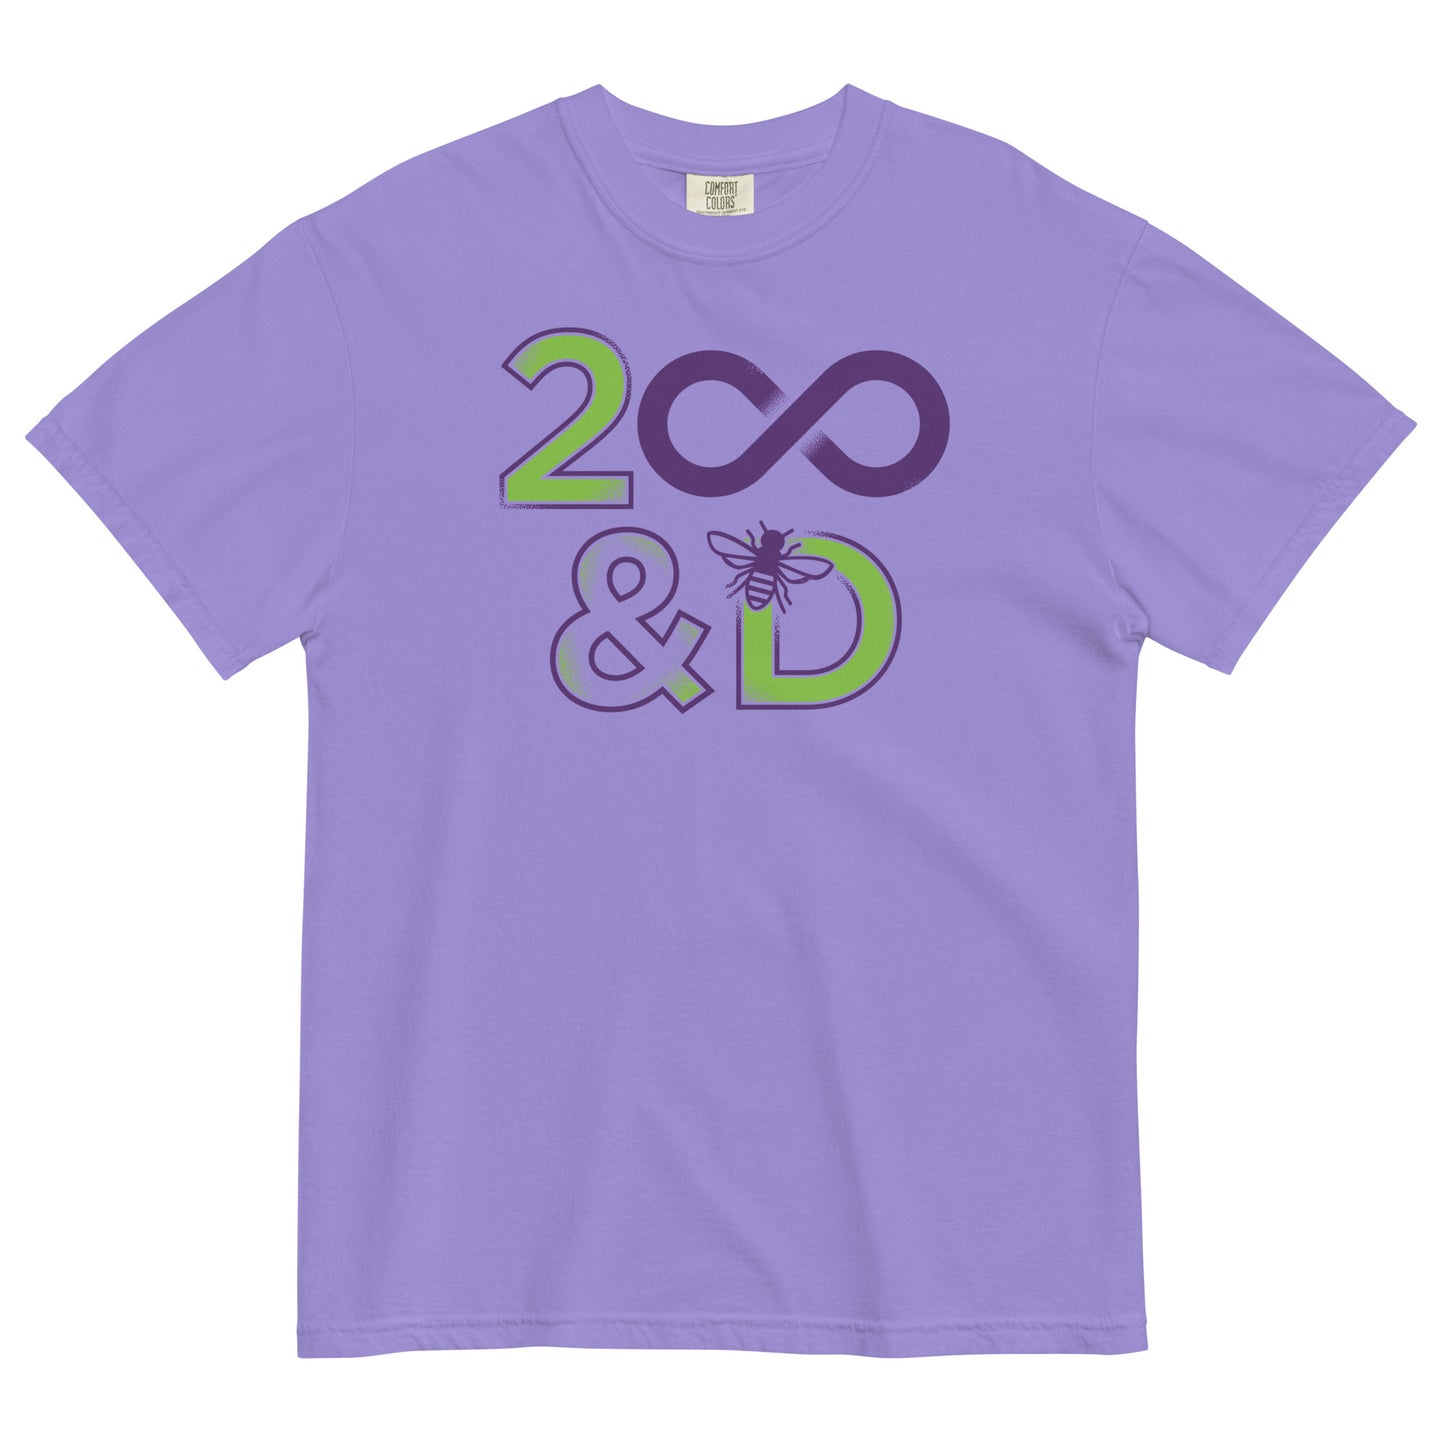 2 Infinity And B On D Men's Relaxed Fit Tee